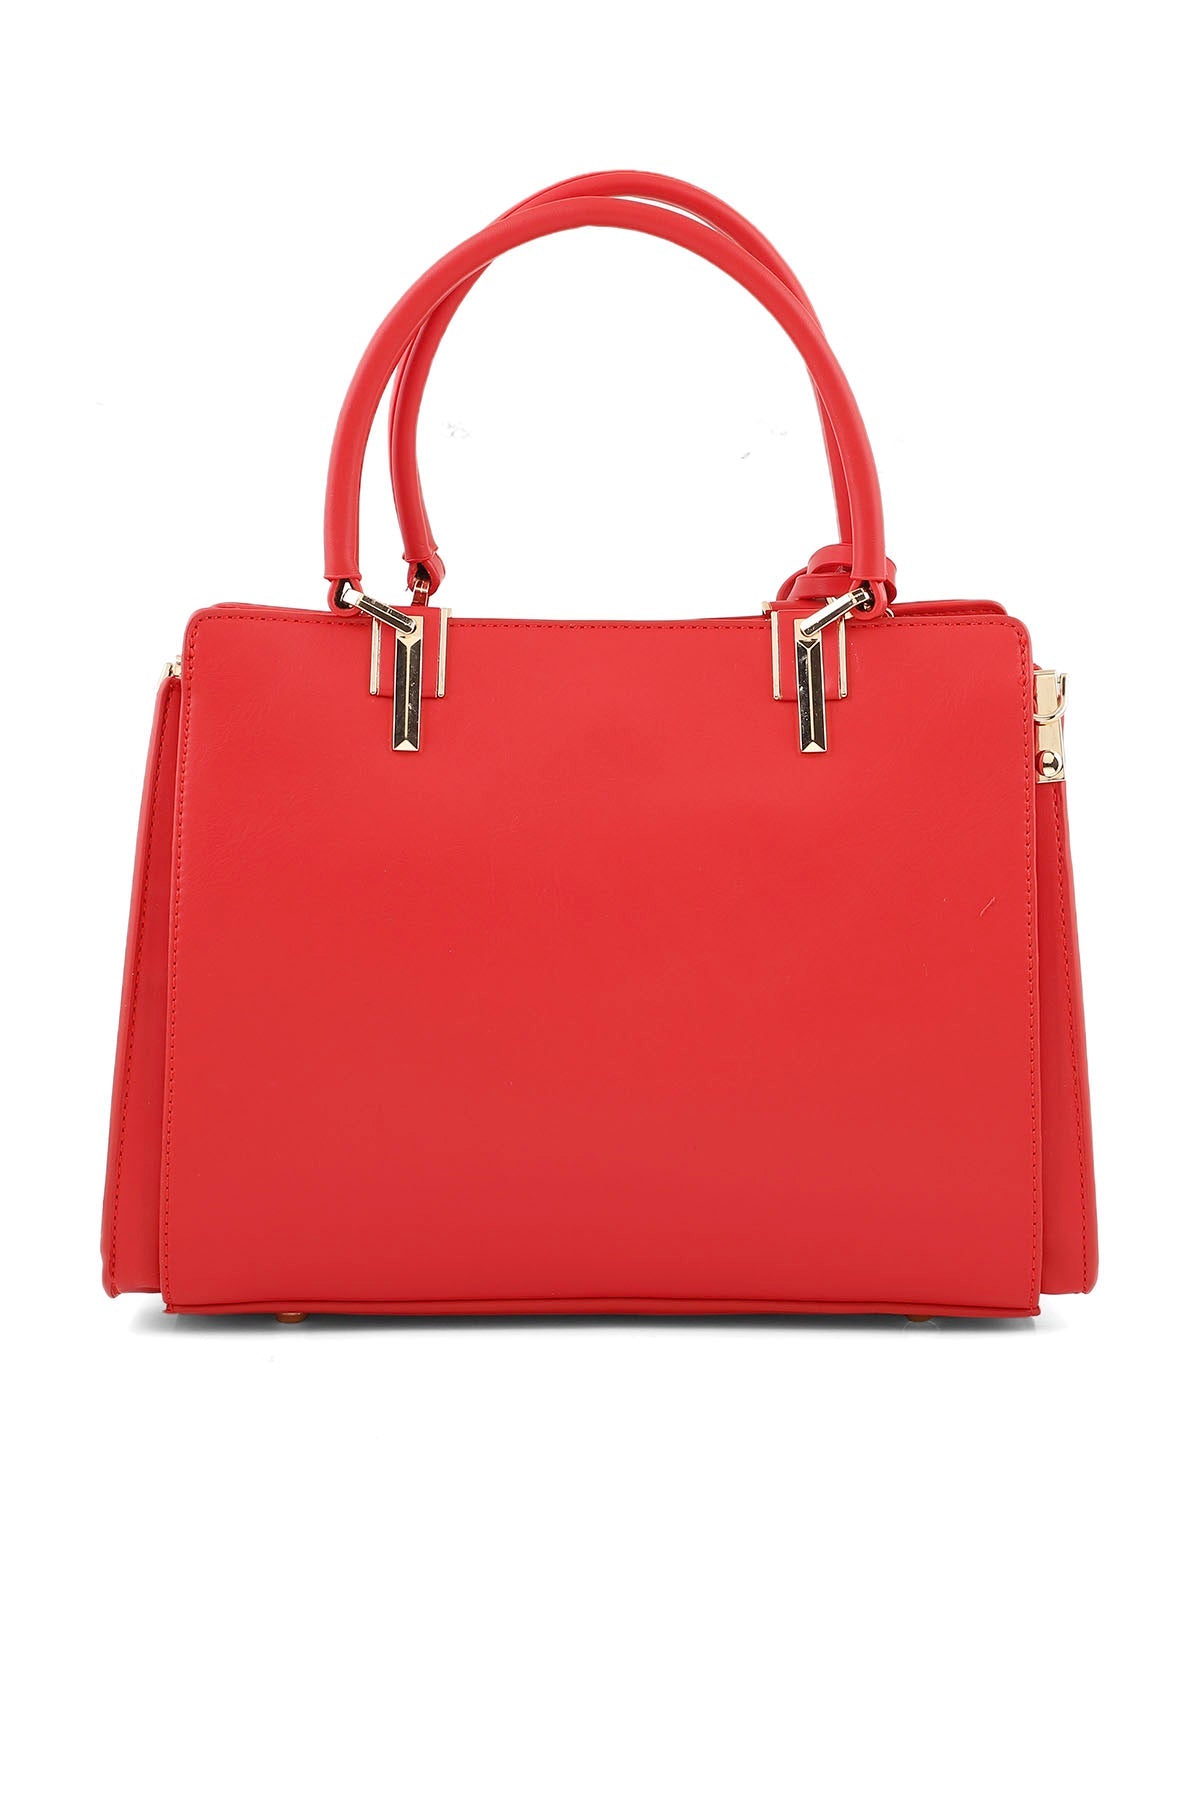 Formal Tote Hand Bags B14992-Red